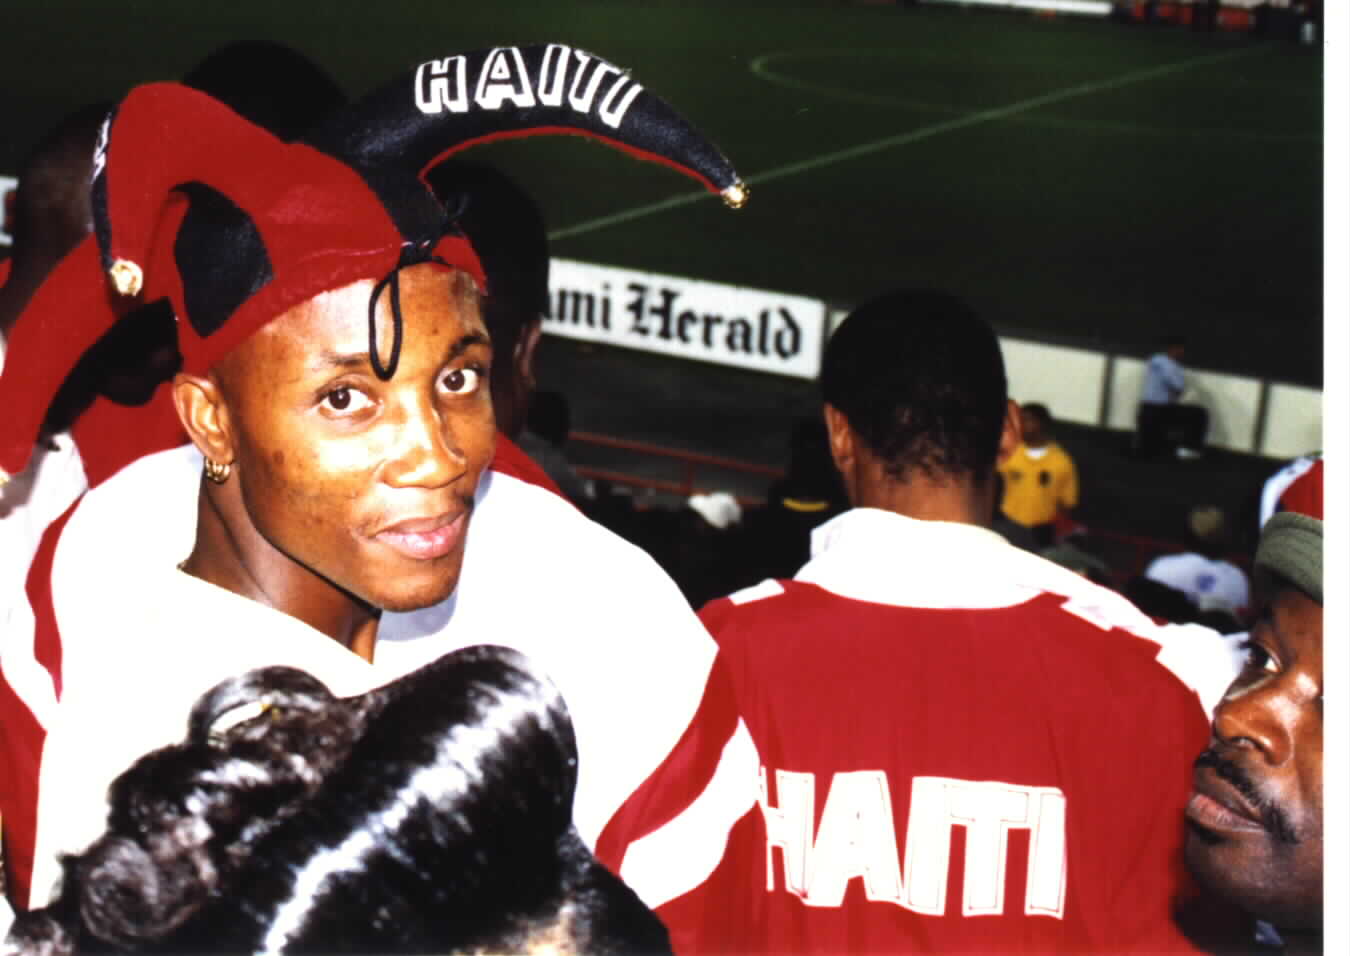 (Haitian dressed for the Gold Cup 2000 soccer Carnival.)Picture courtesy of Noe Dorestant... Give credit where credit is due.